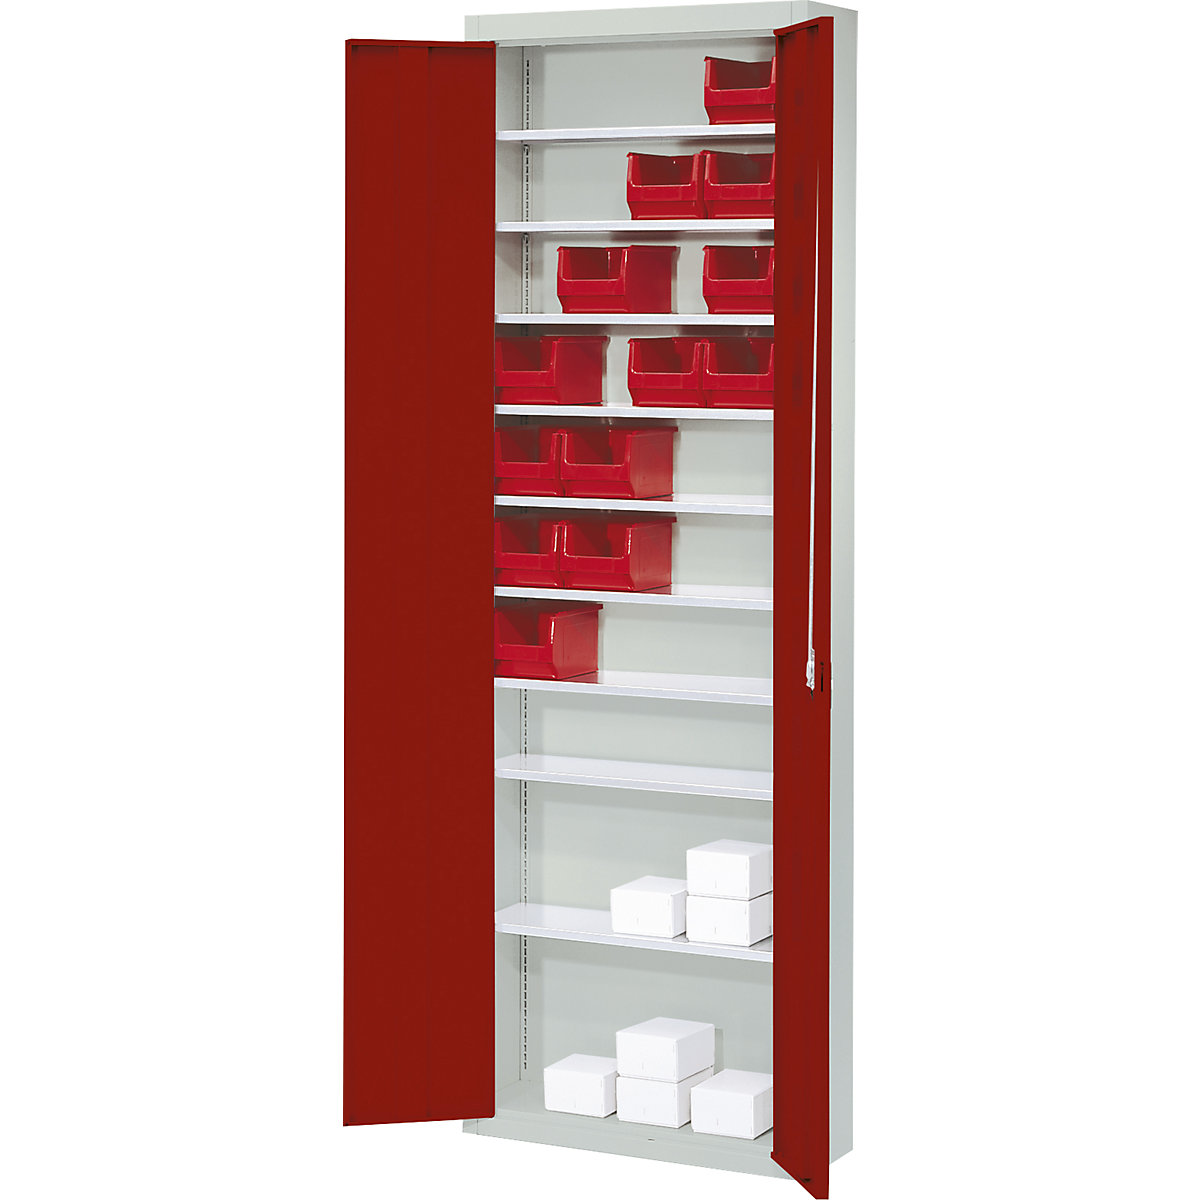 Storage cupboard, without open fronted storage bins – mauser, HxWxD 2150 x 680 x 280 mm, two-colour, grey body, red doors-5